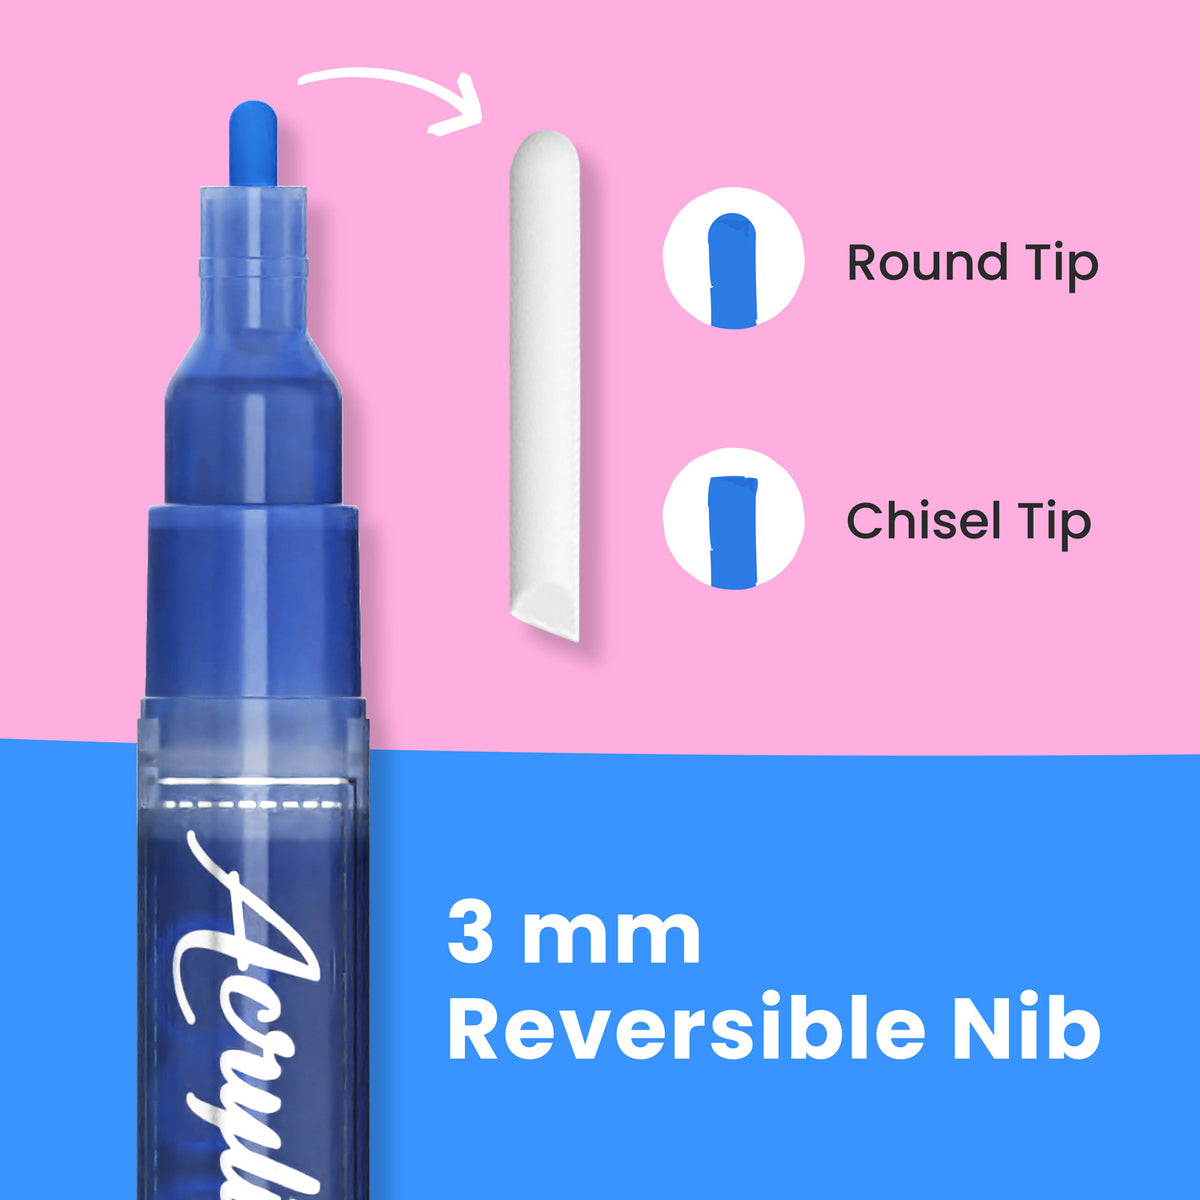 3mm Acrylic Paint Marker – Scribble Lady